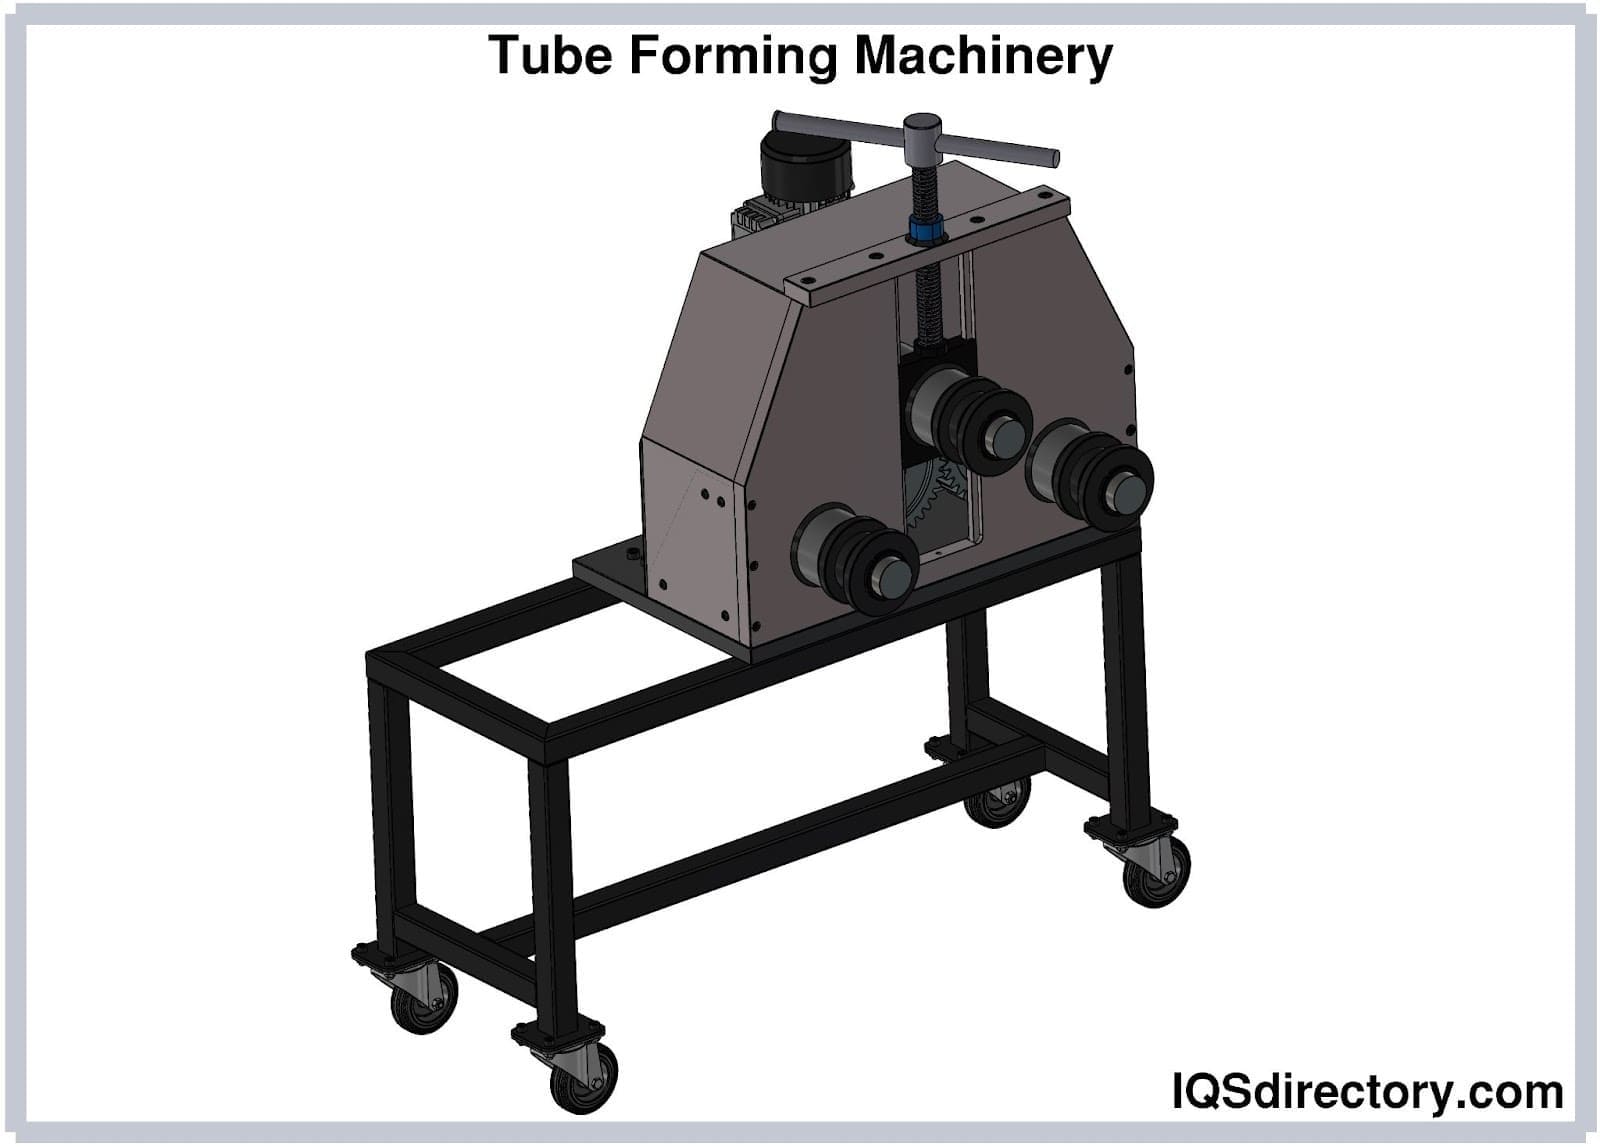 Tube Forming Machinery